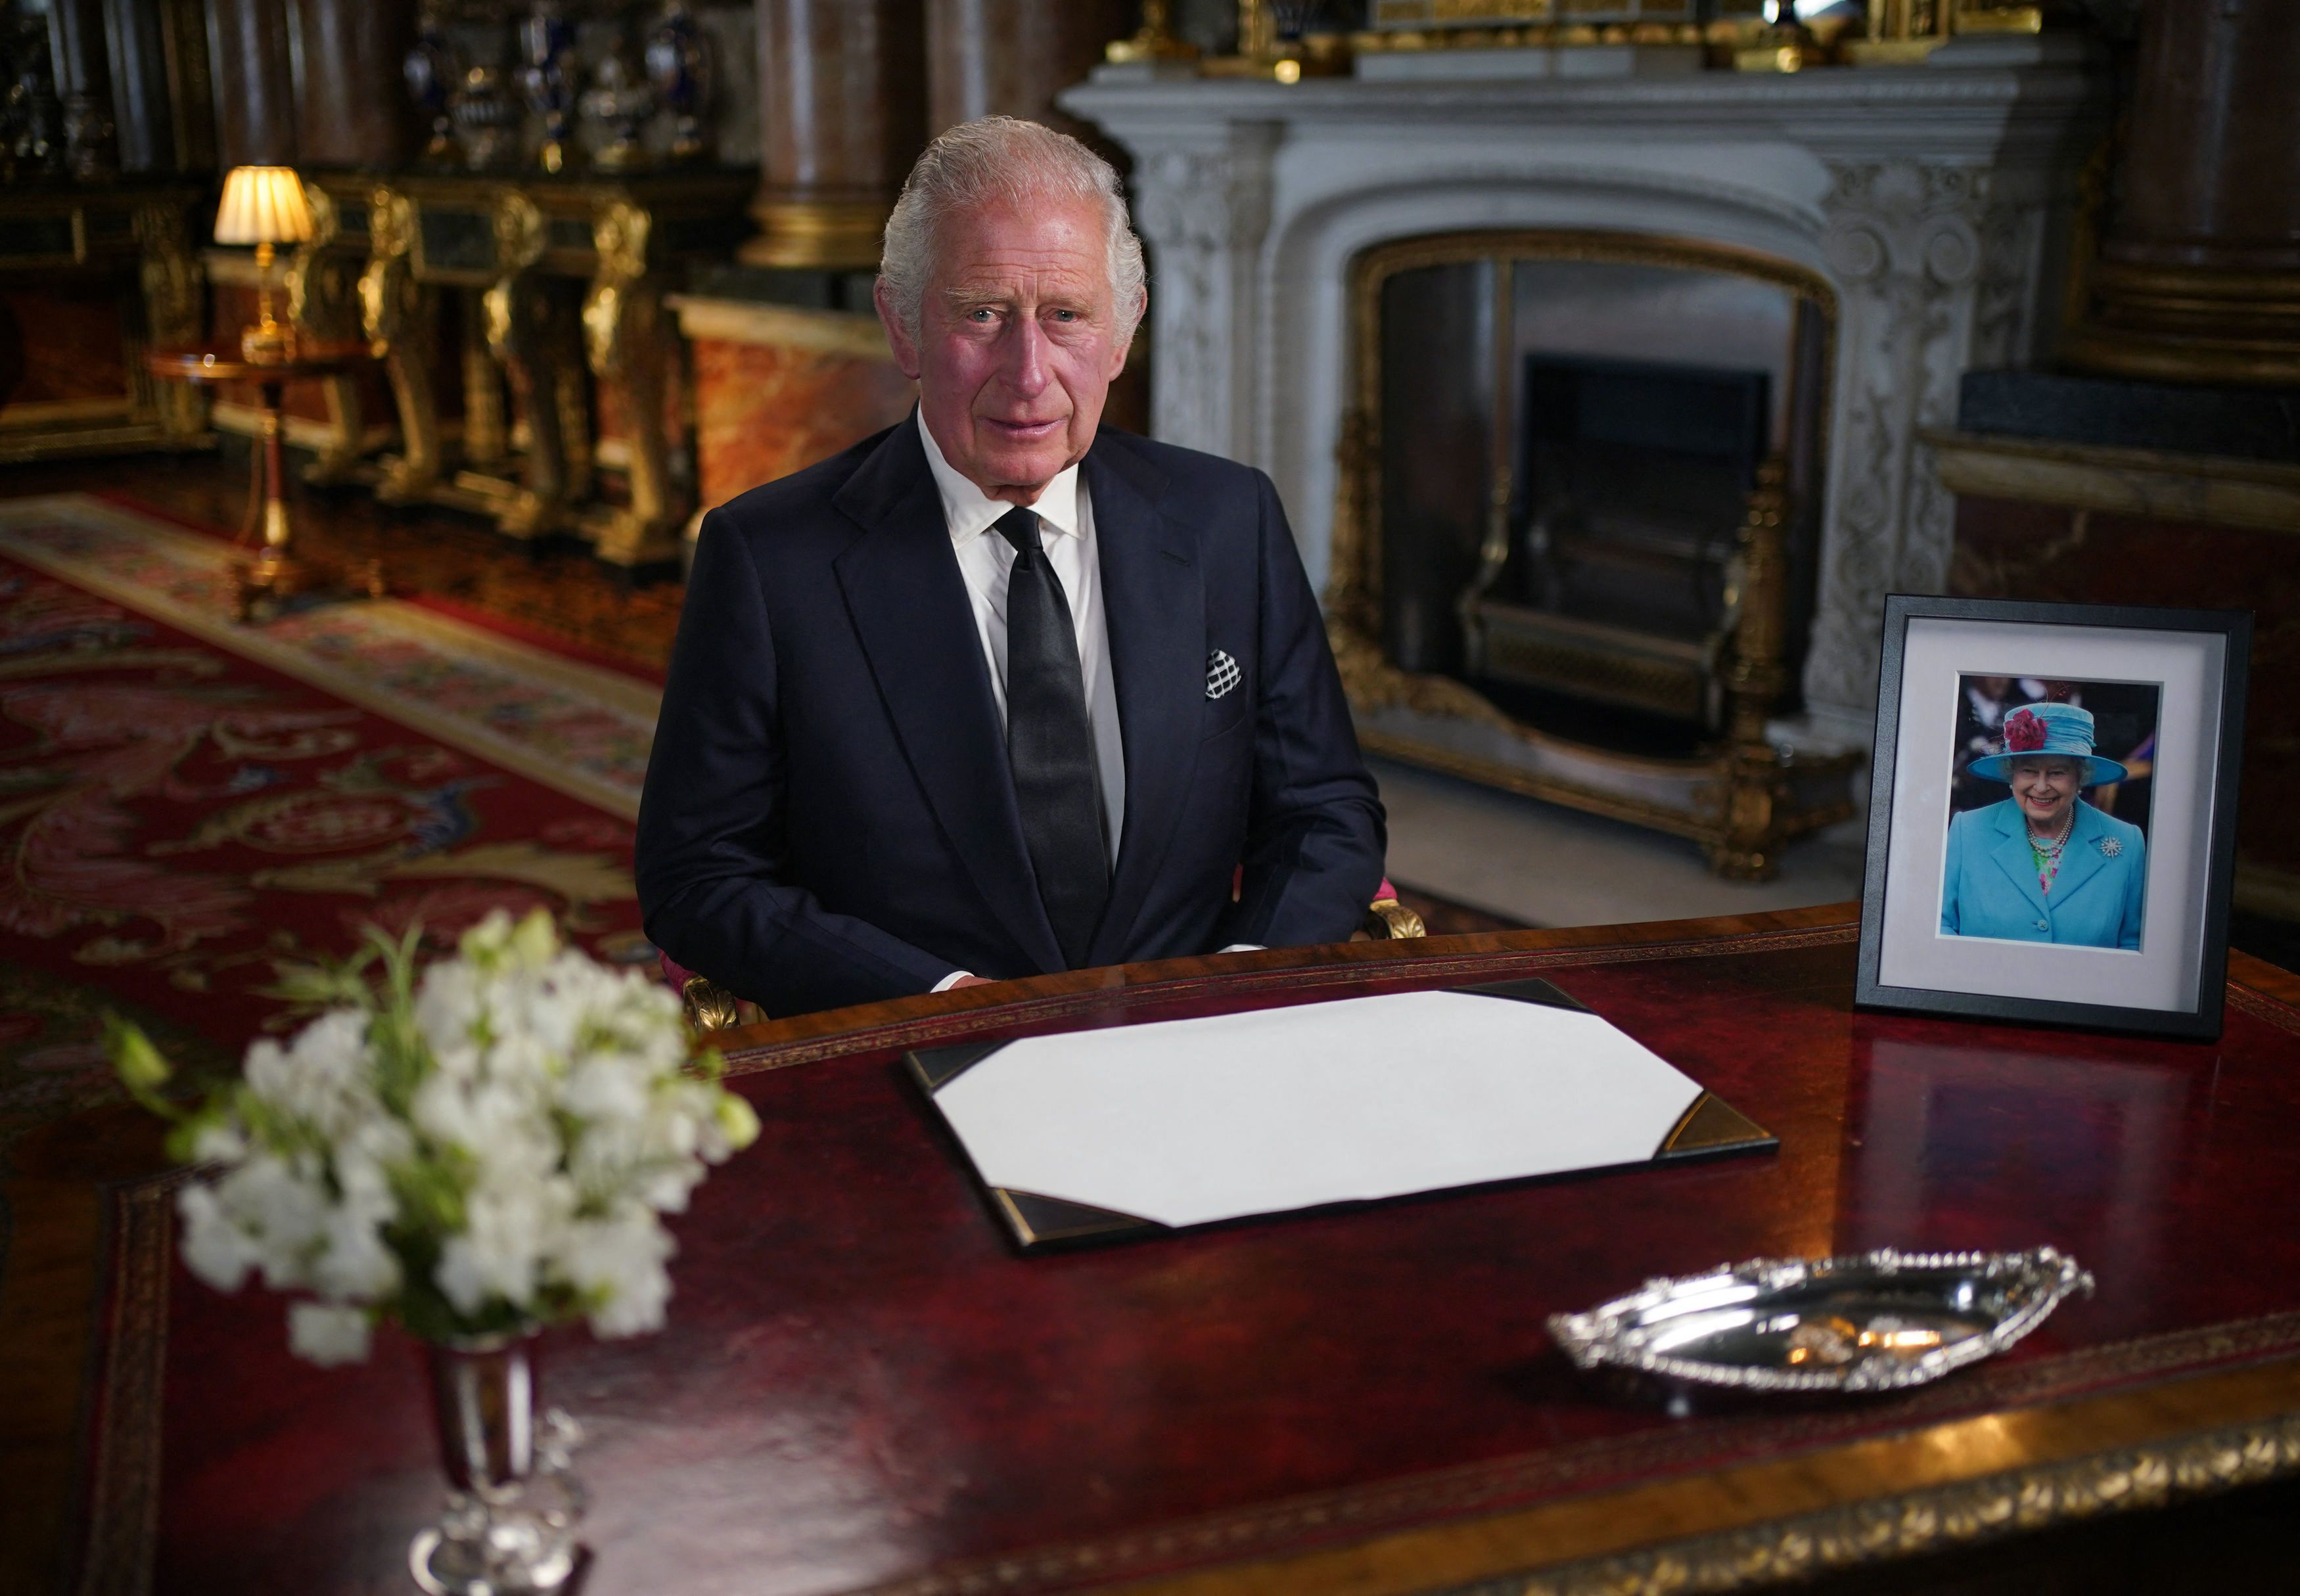 Read King Charles III's First Speech in Full